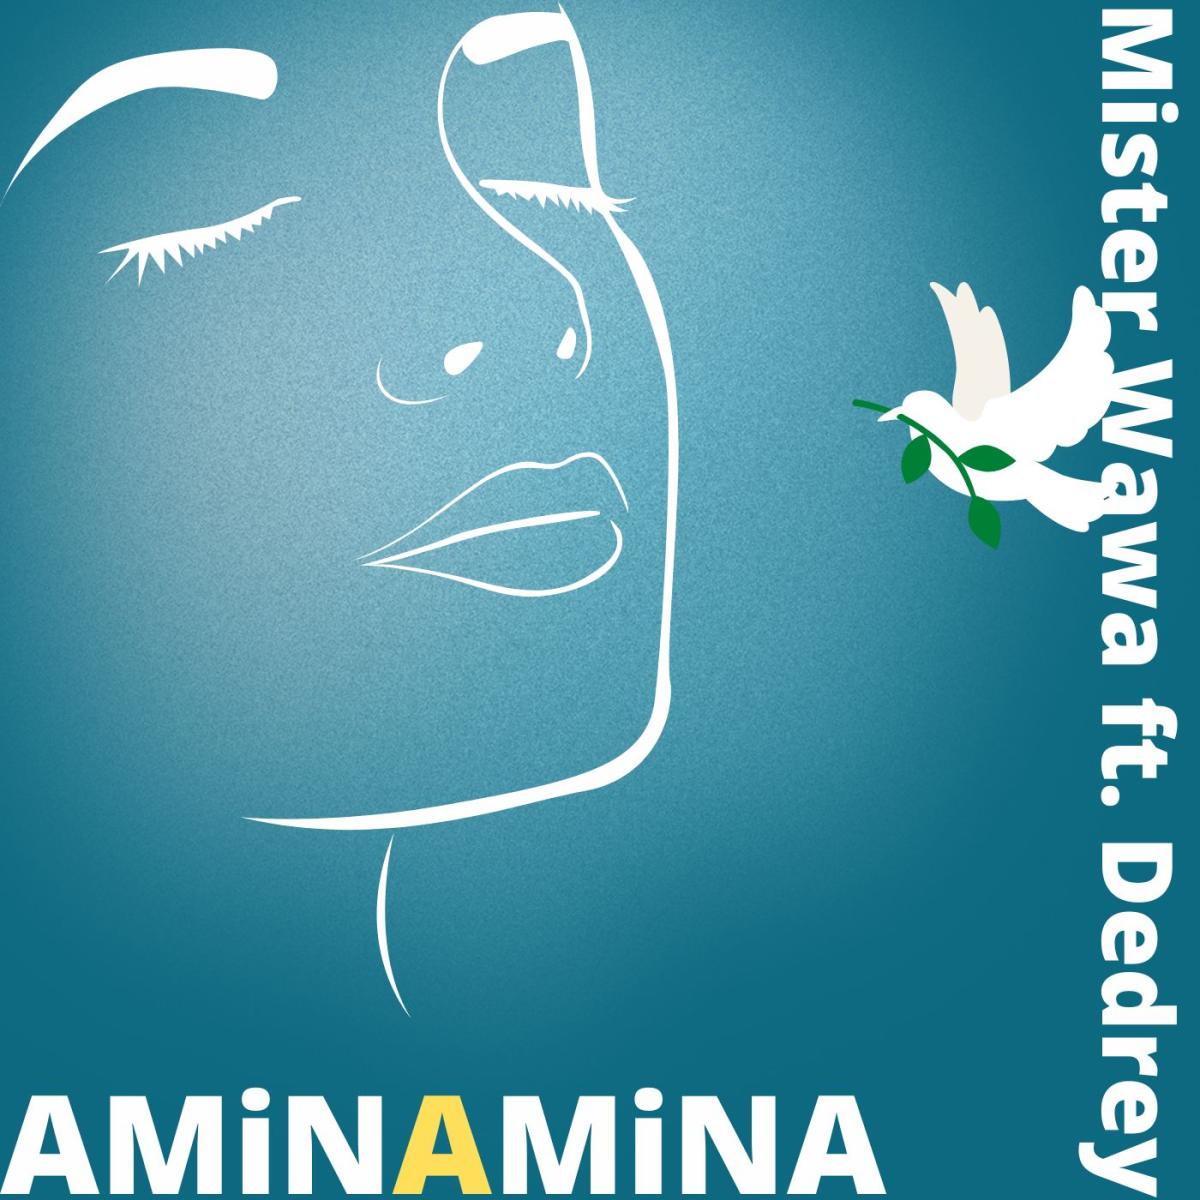 Berlin-Based Afropop Songwriter and Producer Mister Wawa Releases "Amina, Amina"